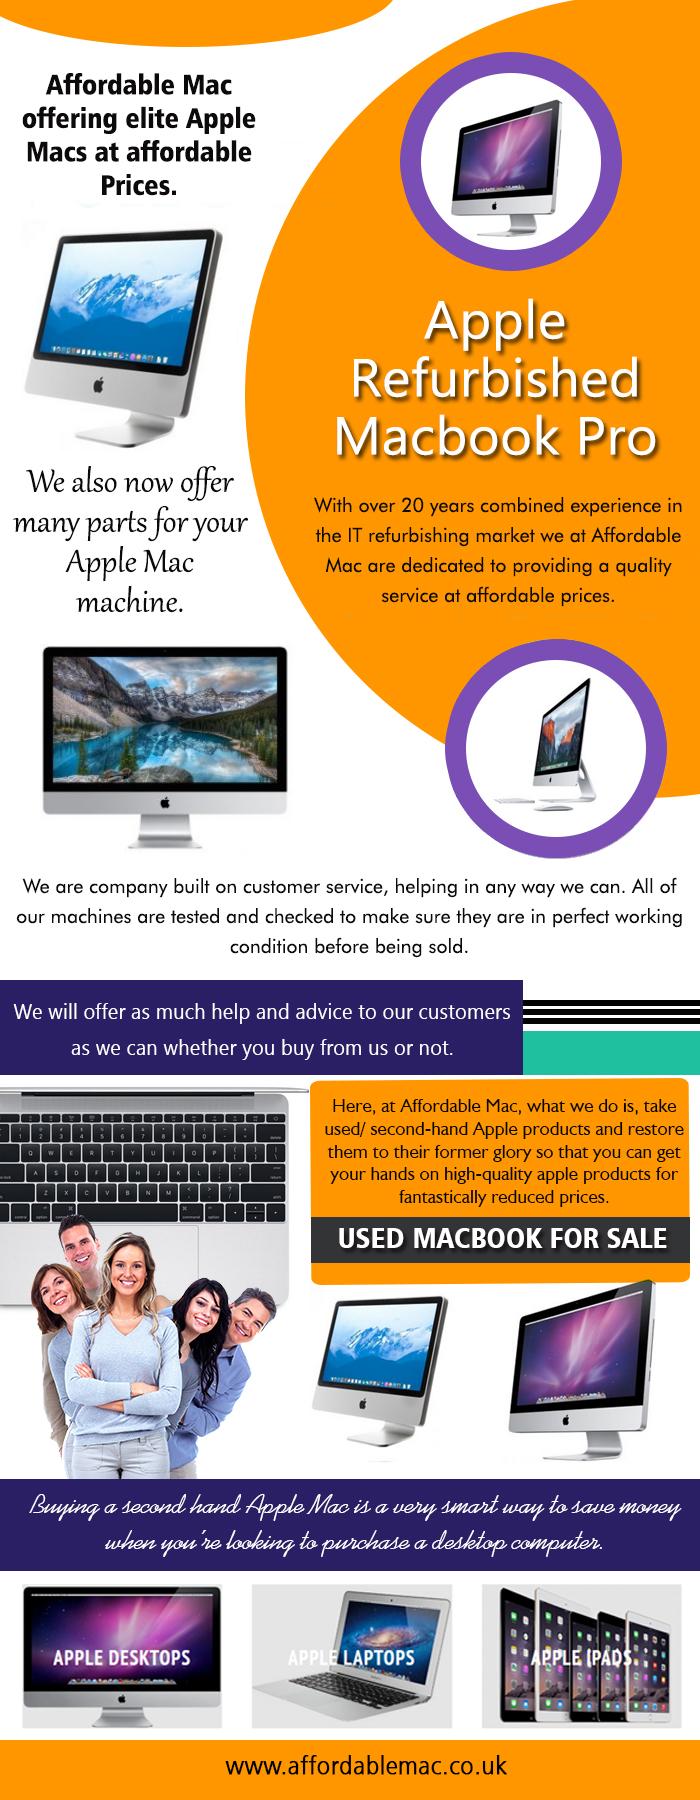 Used Macbook For Sale